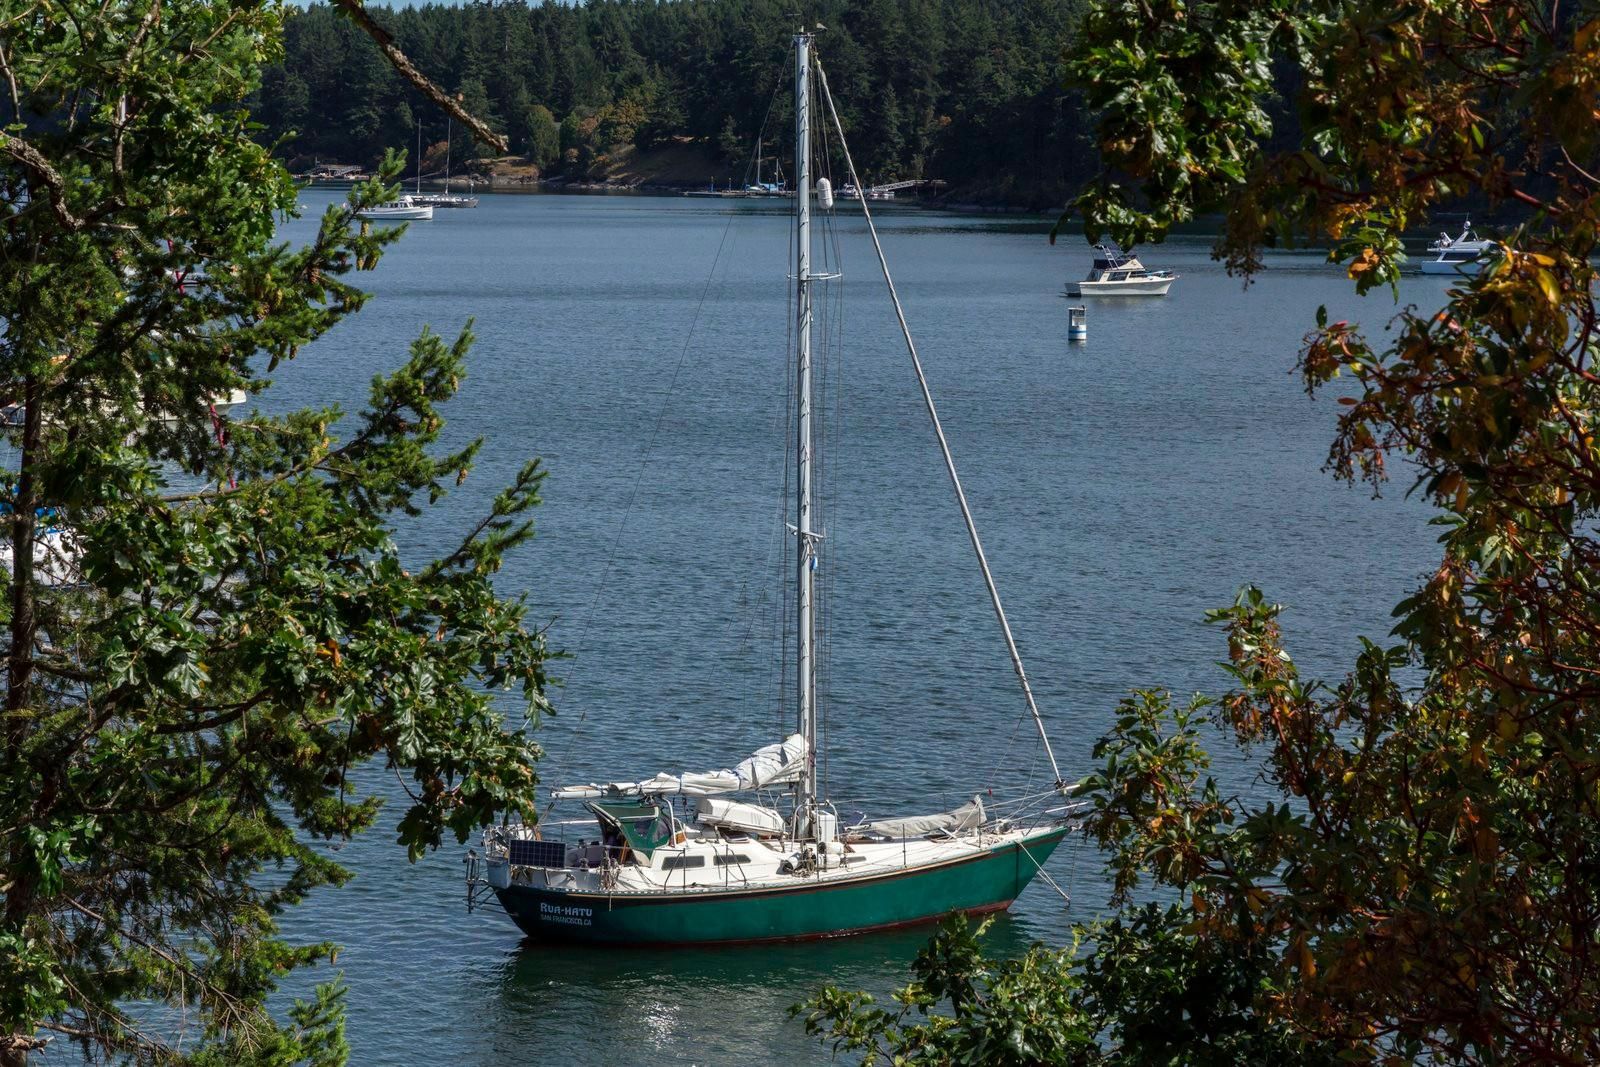 vancouver 36 sailboat for sale